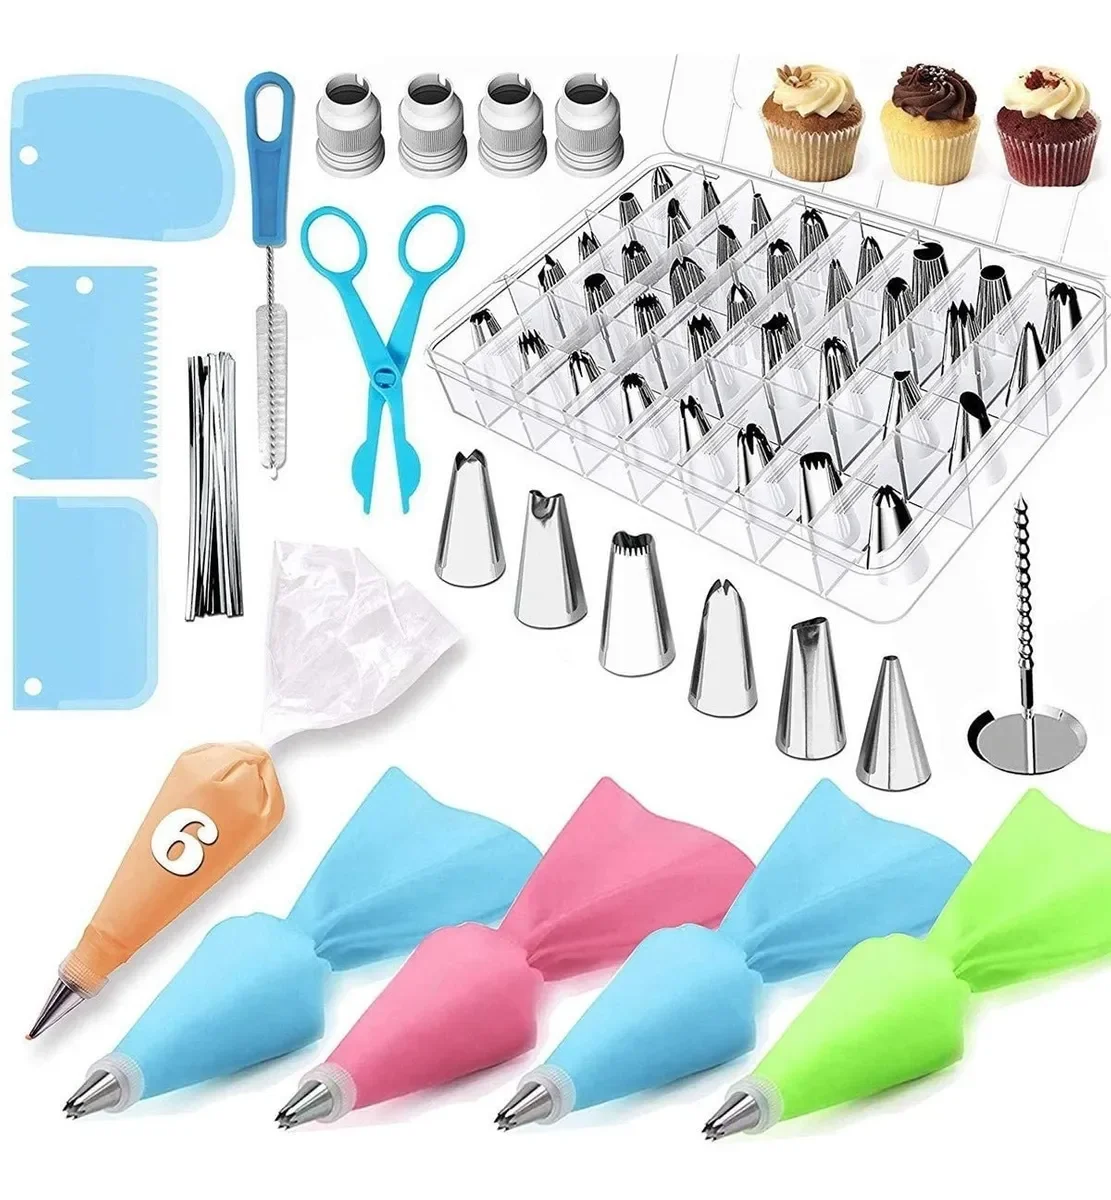 

72Pcs Cake Decorating Supplies Kit Baking Pastry Tools Baking Accessories Cake Tools turntable cake nozzle piping bags bake tool